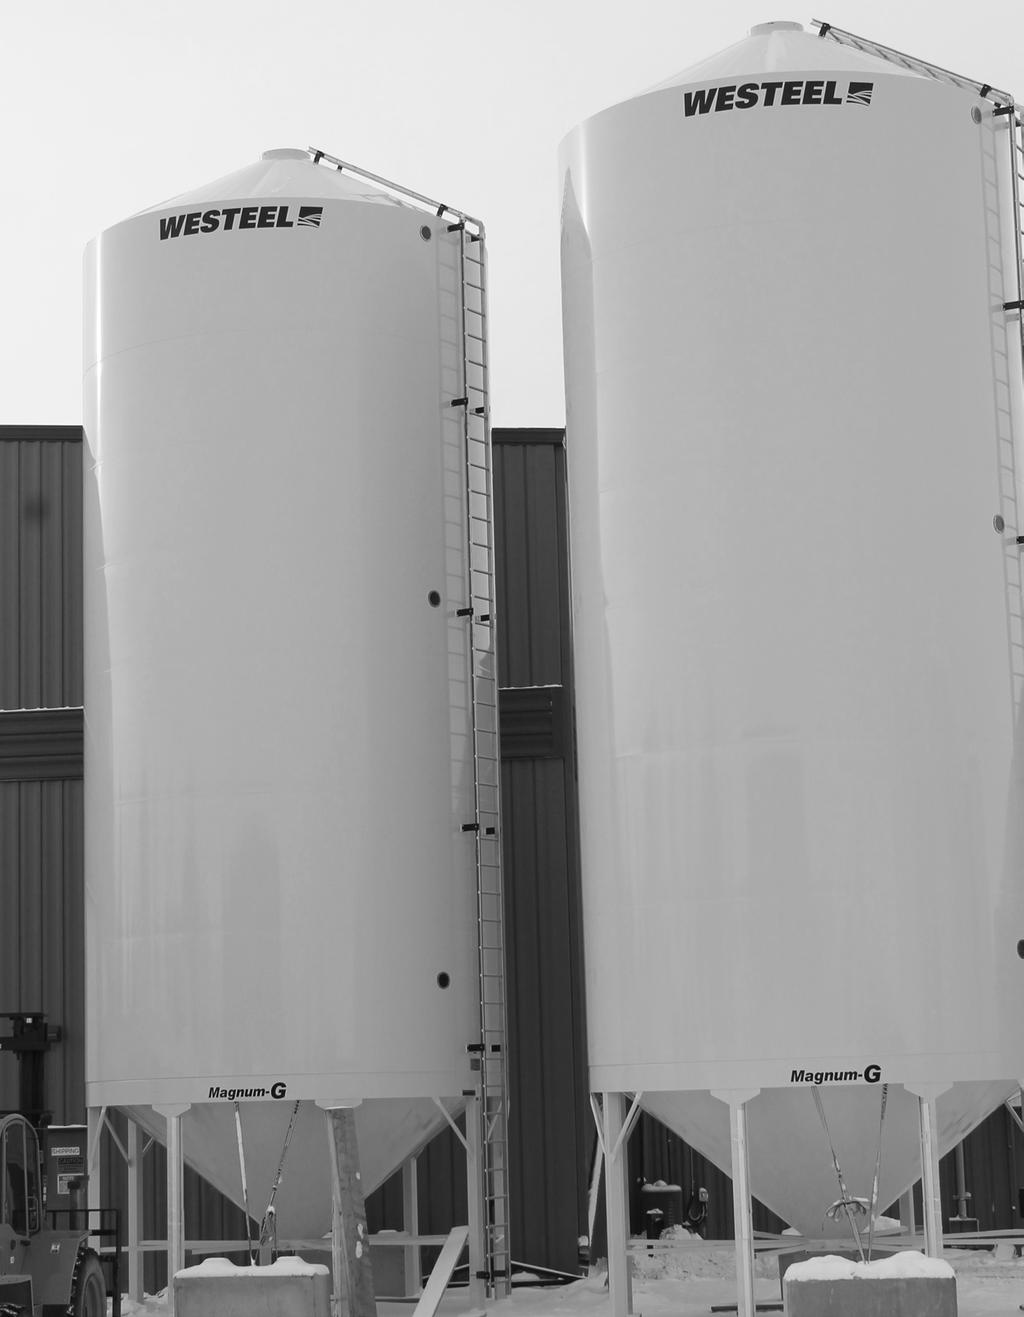 Quality in steel since 1905 Westeel has offered quality steel storage solutions to multiple industries for over a century.